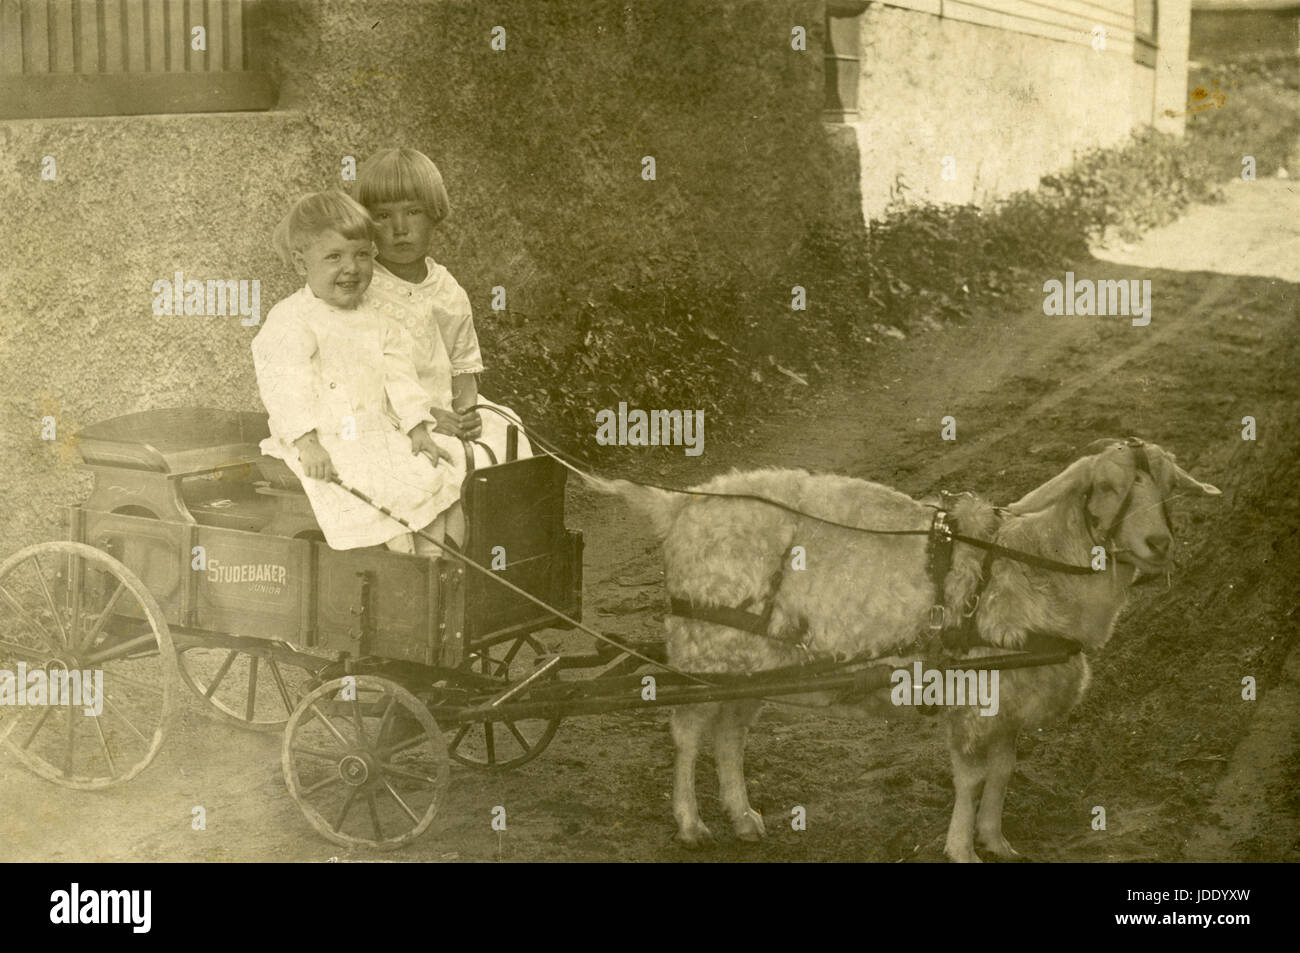 Antique c1905 photograph,two children in a Studebaker Junior wagon being pulled by a goat. Location is probably Mankato, Minnesota. SOURCE: ORIGINAL PHOTOGRAPH. Stock Photo